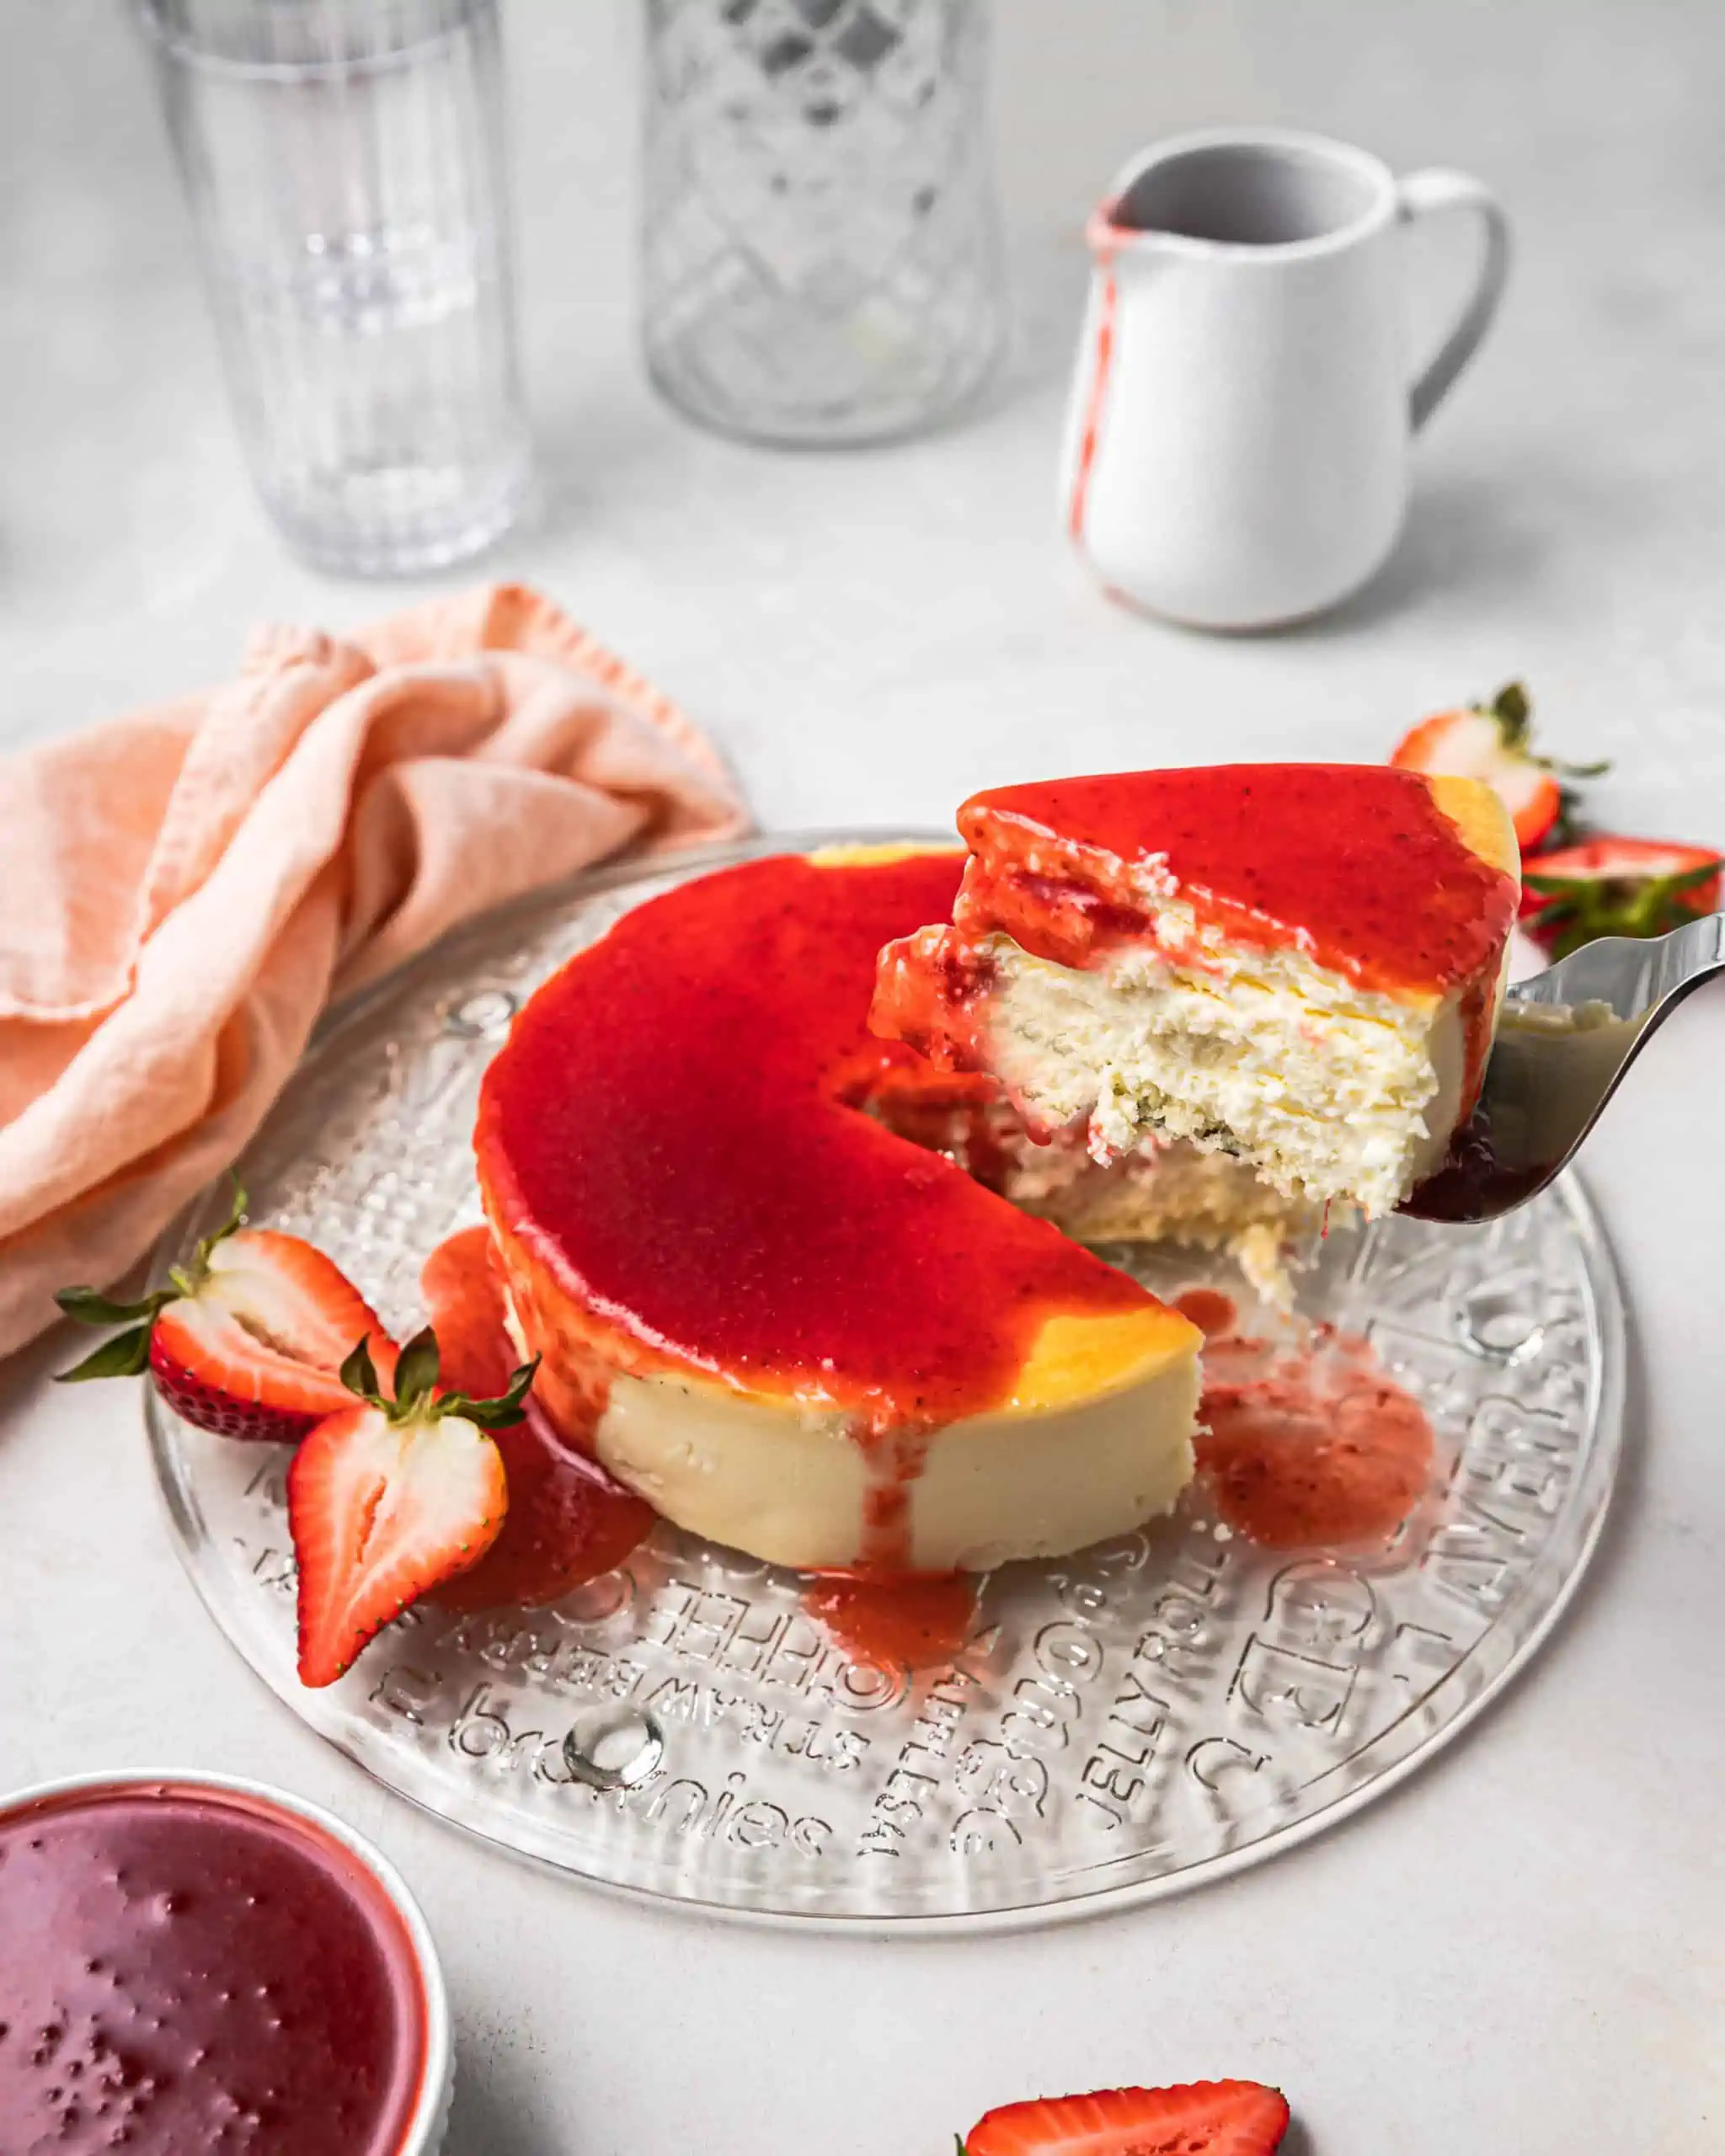 Cheesecake with Strawberry Coulis.